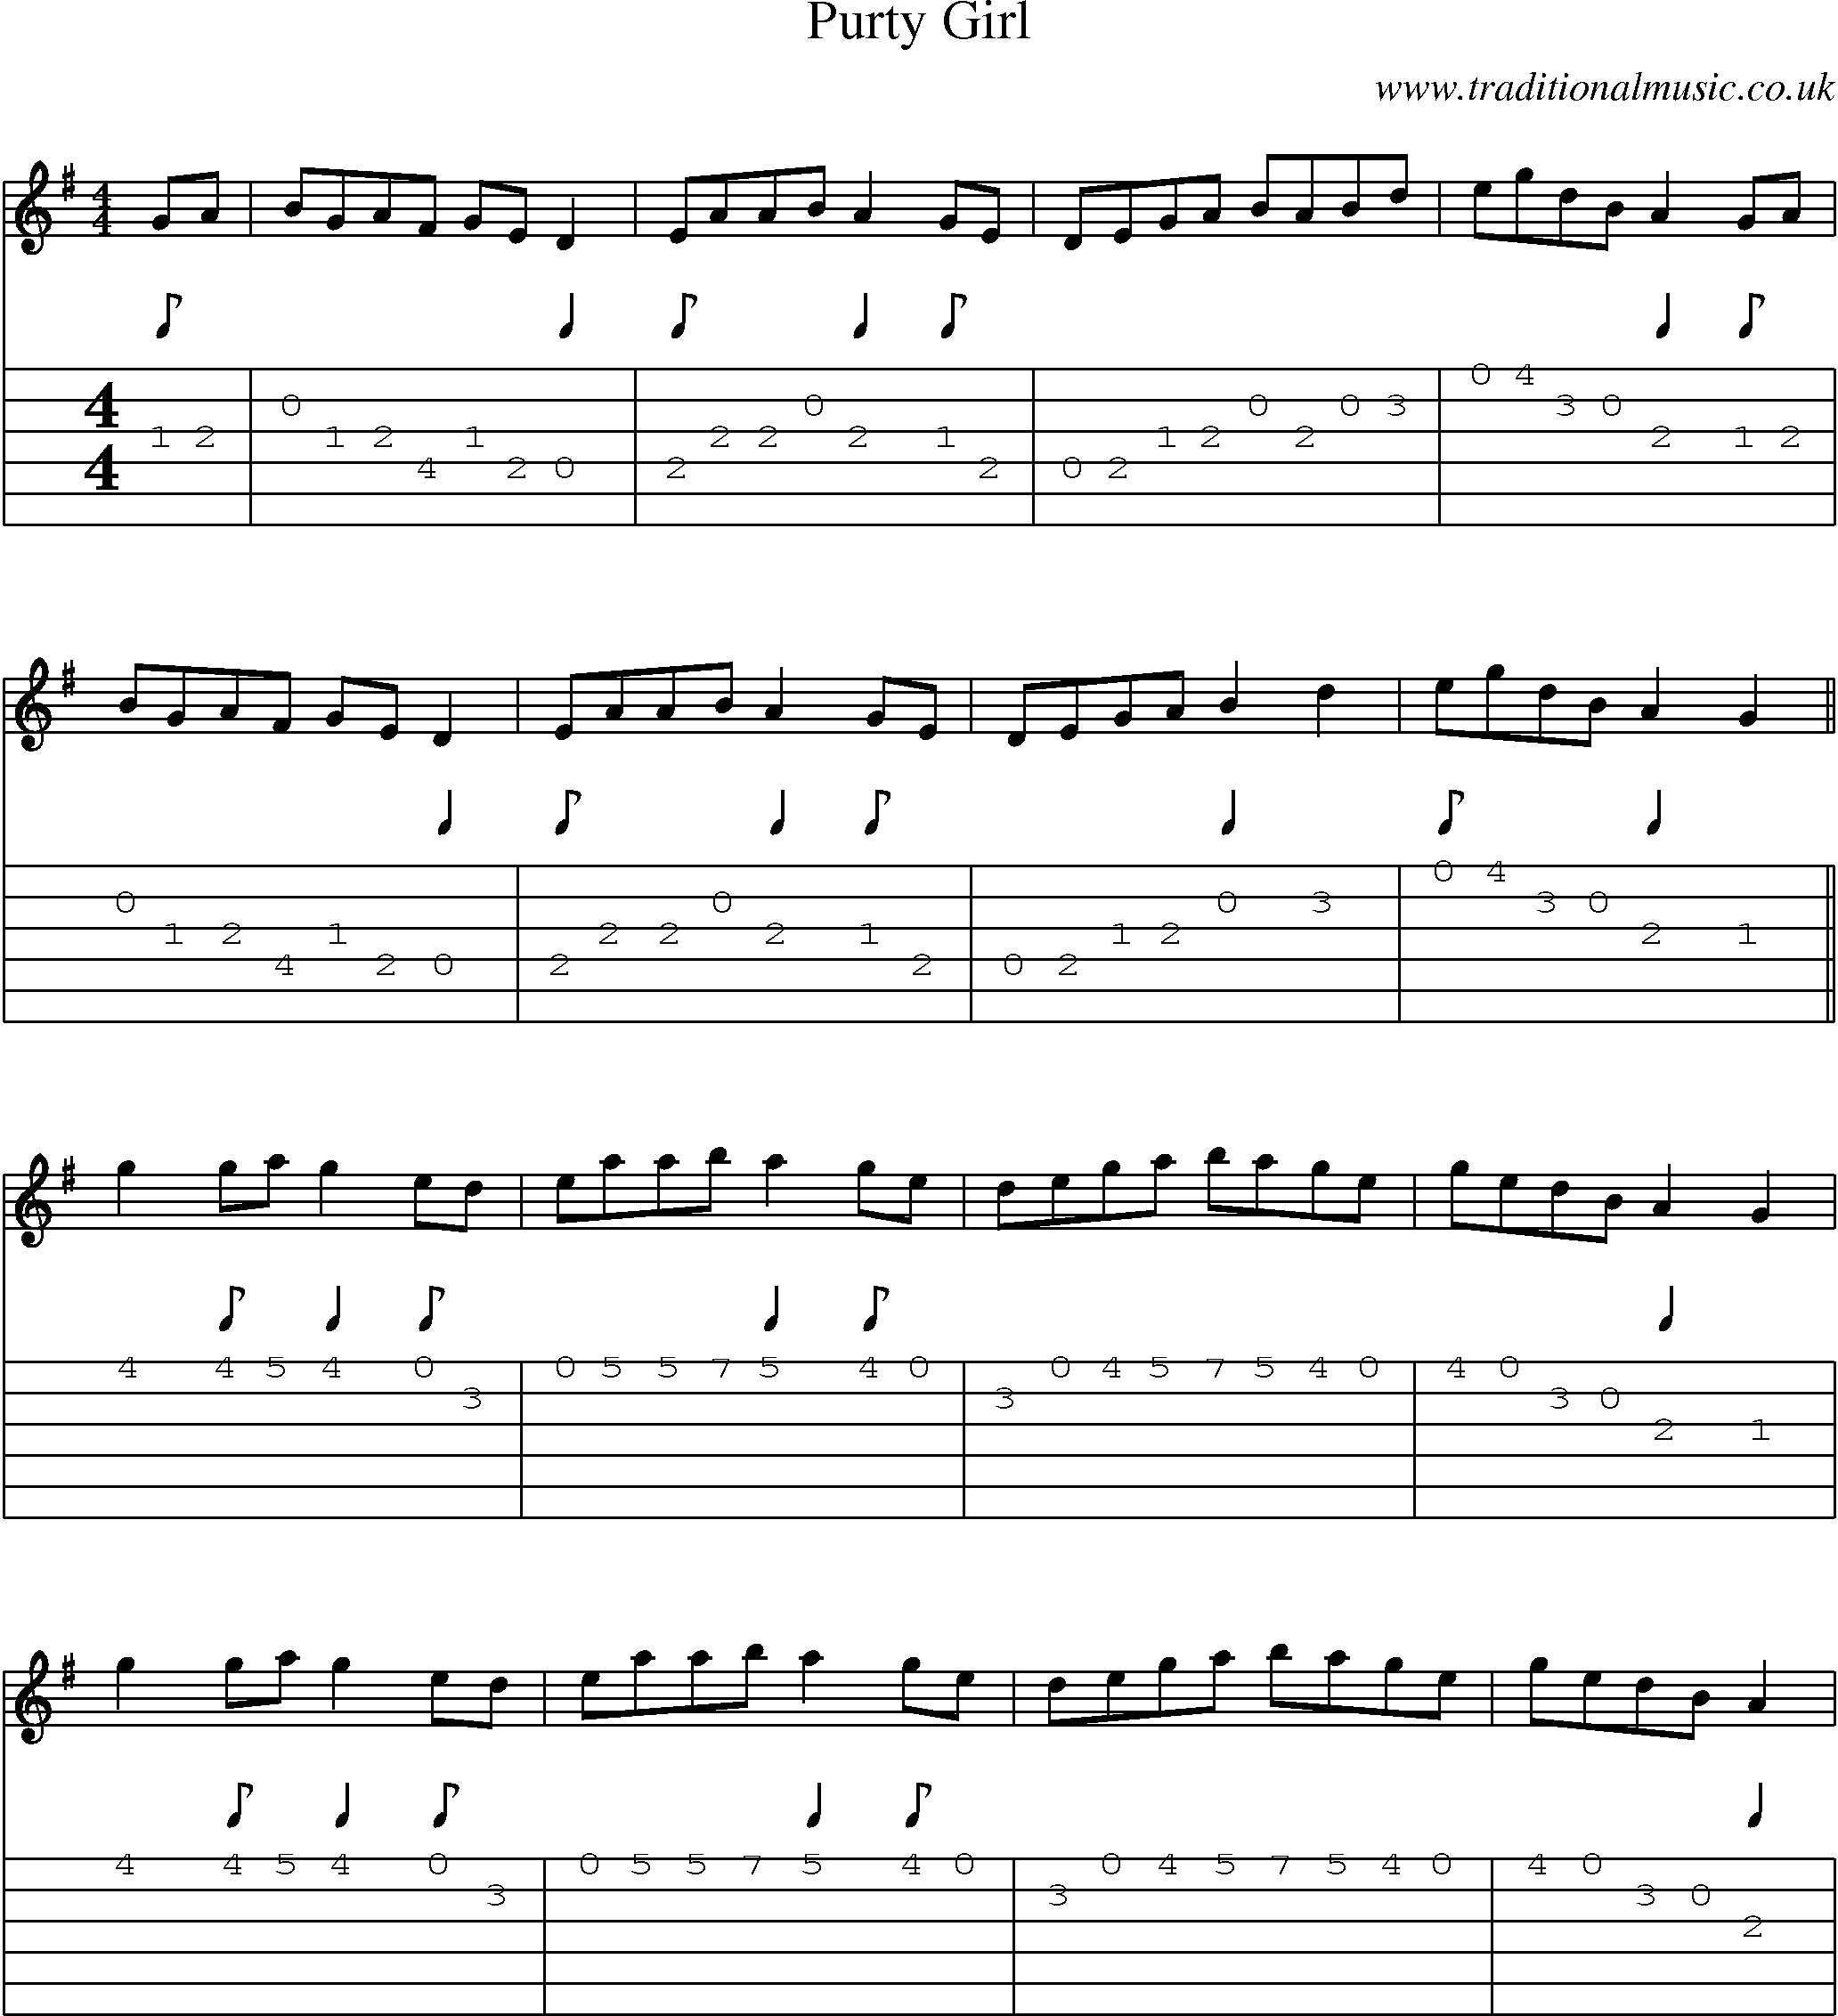 Music Score and Guitar Tabs for Purty Girl